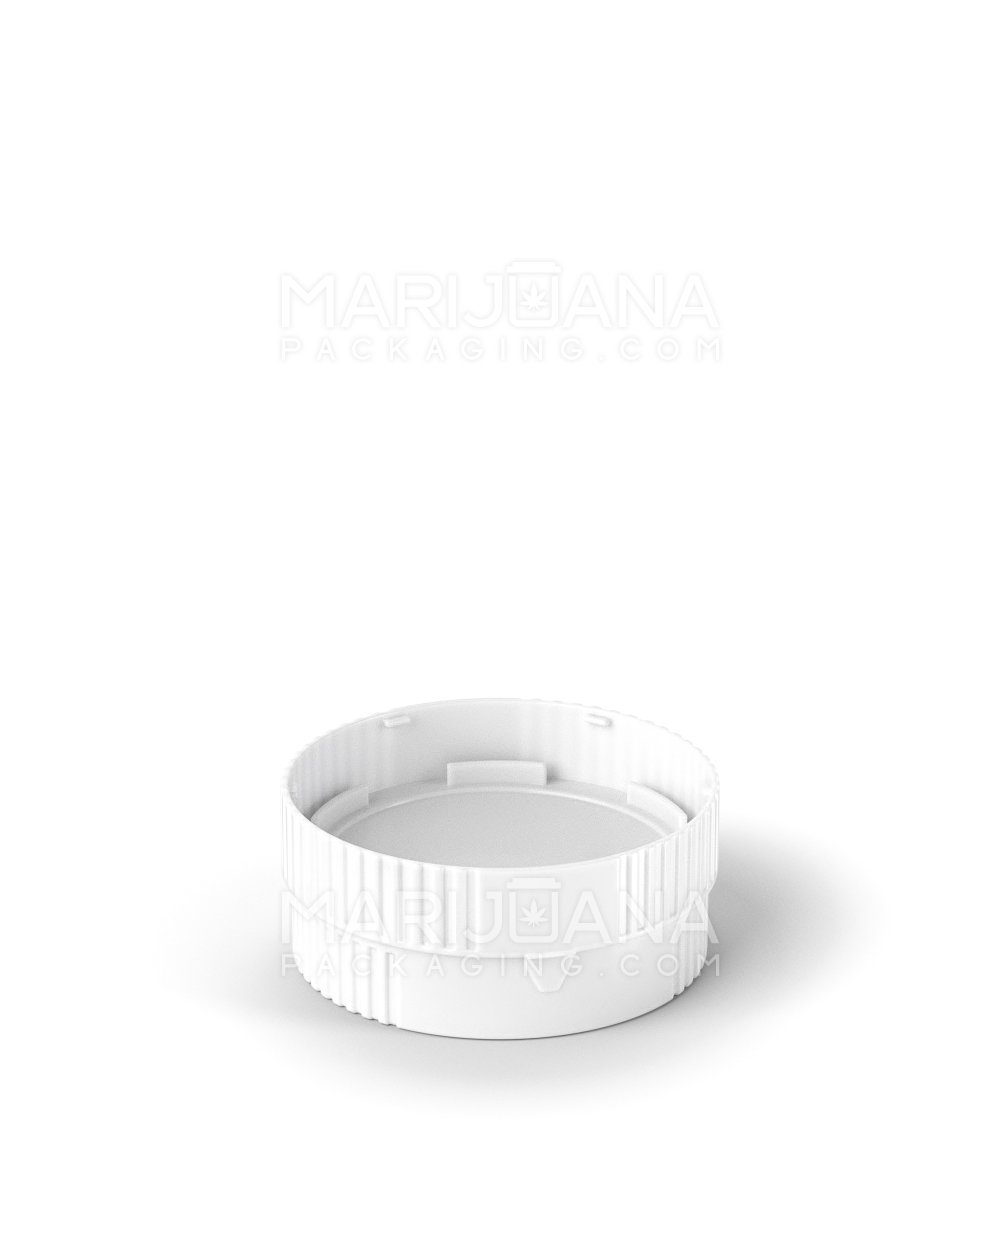 Child Resistant | Push & Turn Vial with Grinder Cap | 60dr - White Plastic - 100 Count - 10